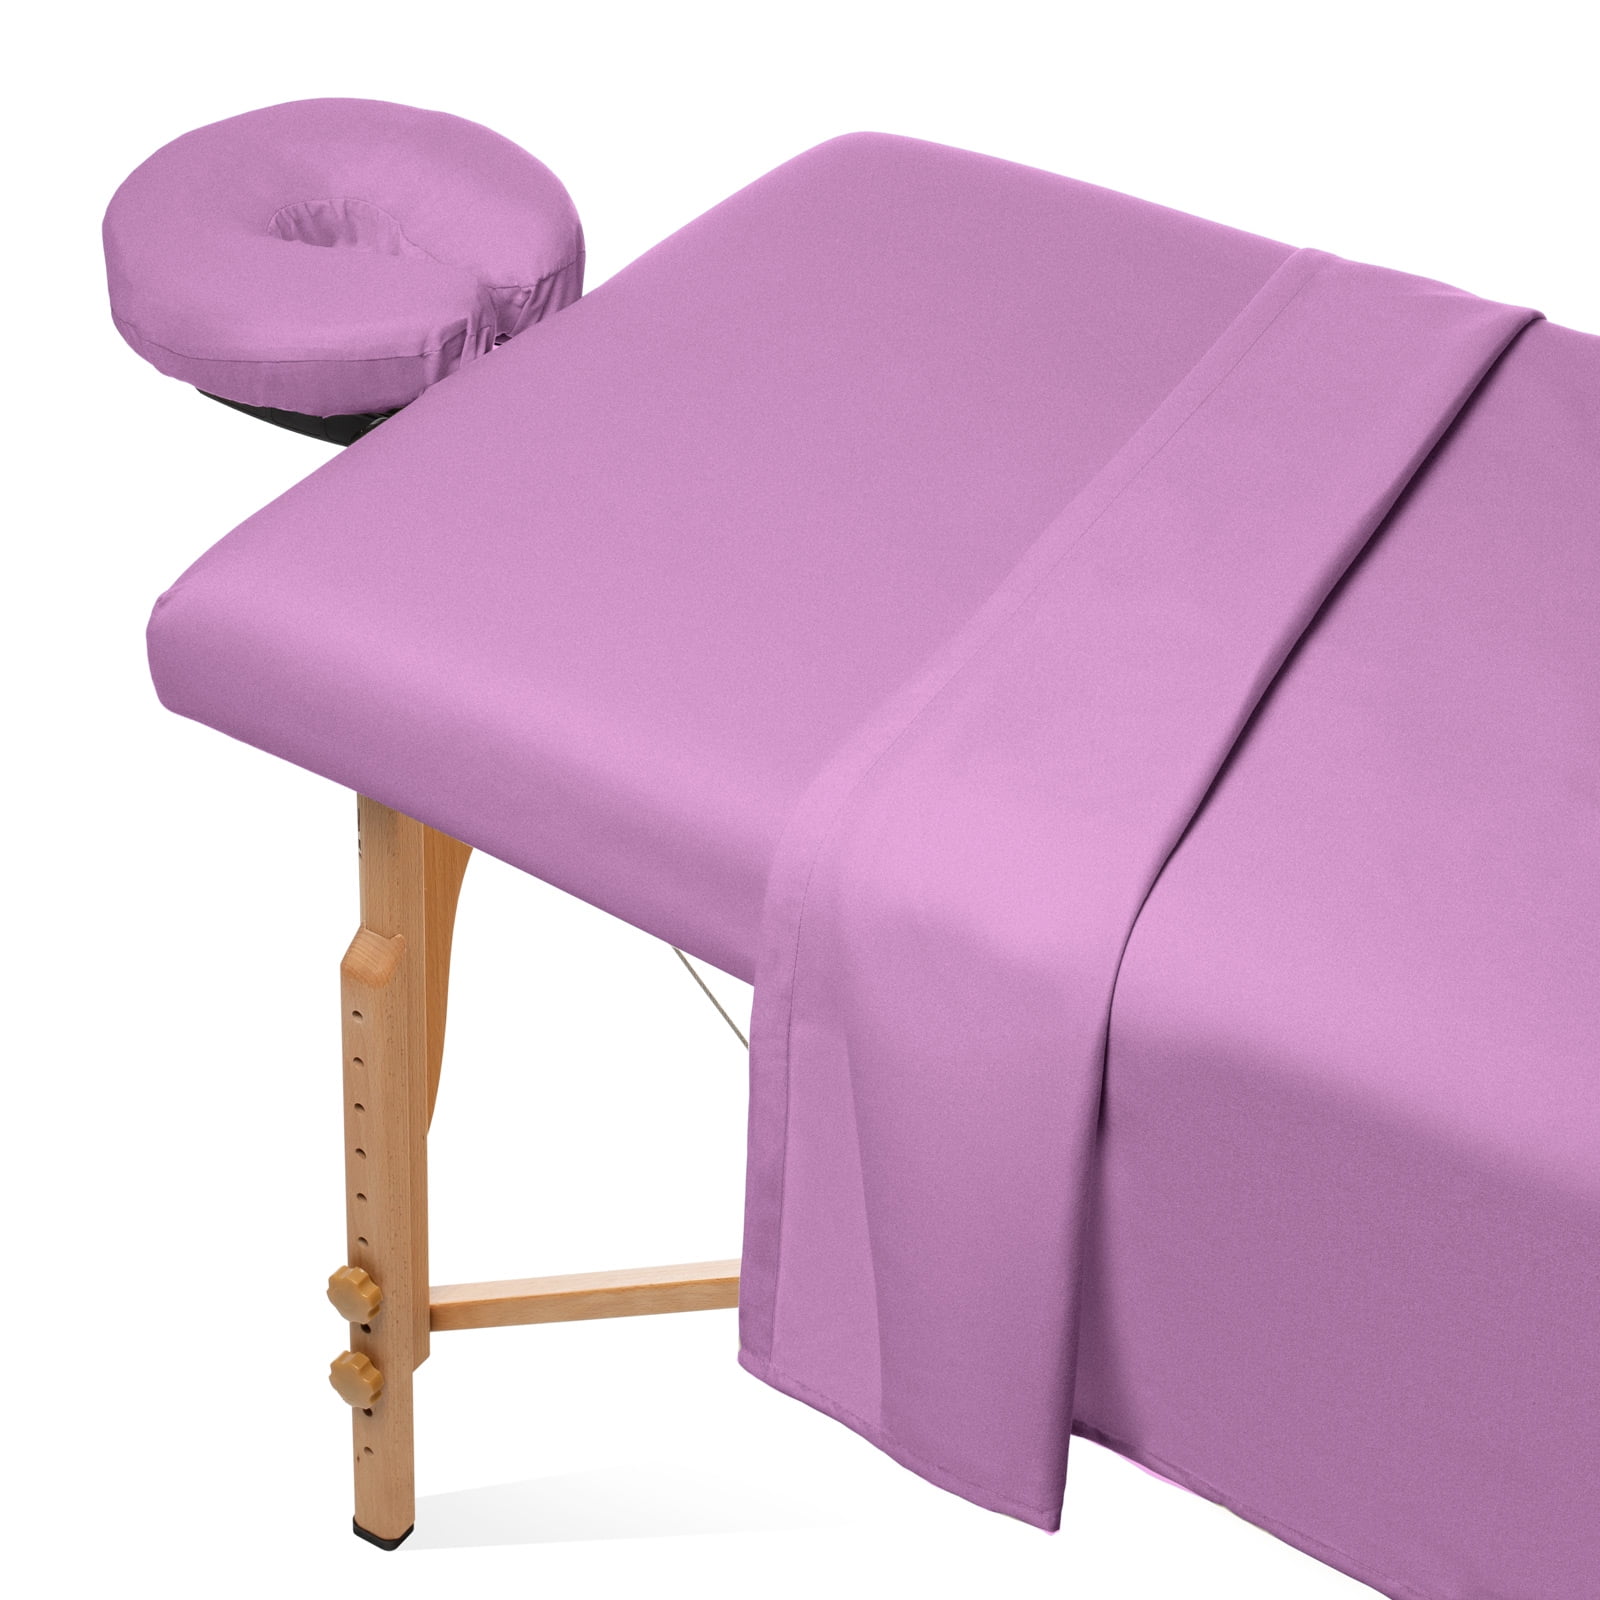 20pcs Massage Disposable Fitted Table Sheet Cover for Massage Table,Pink 